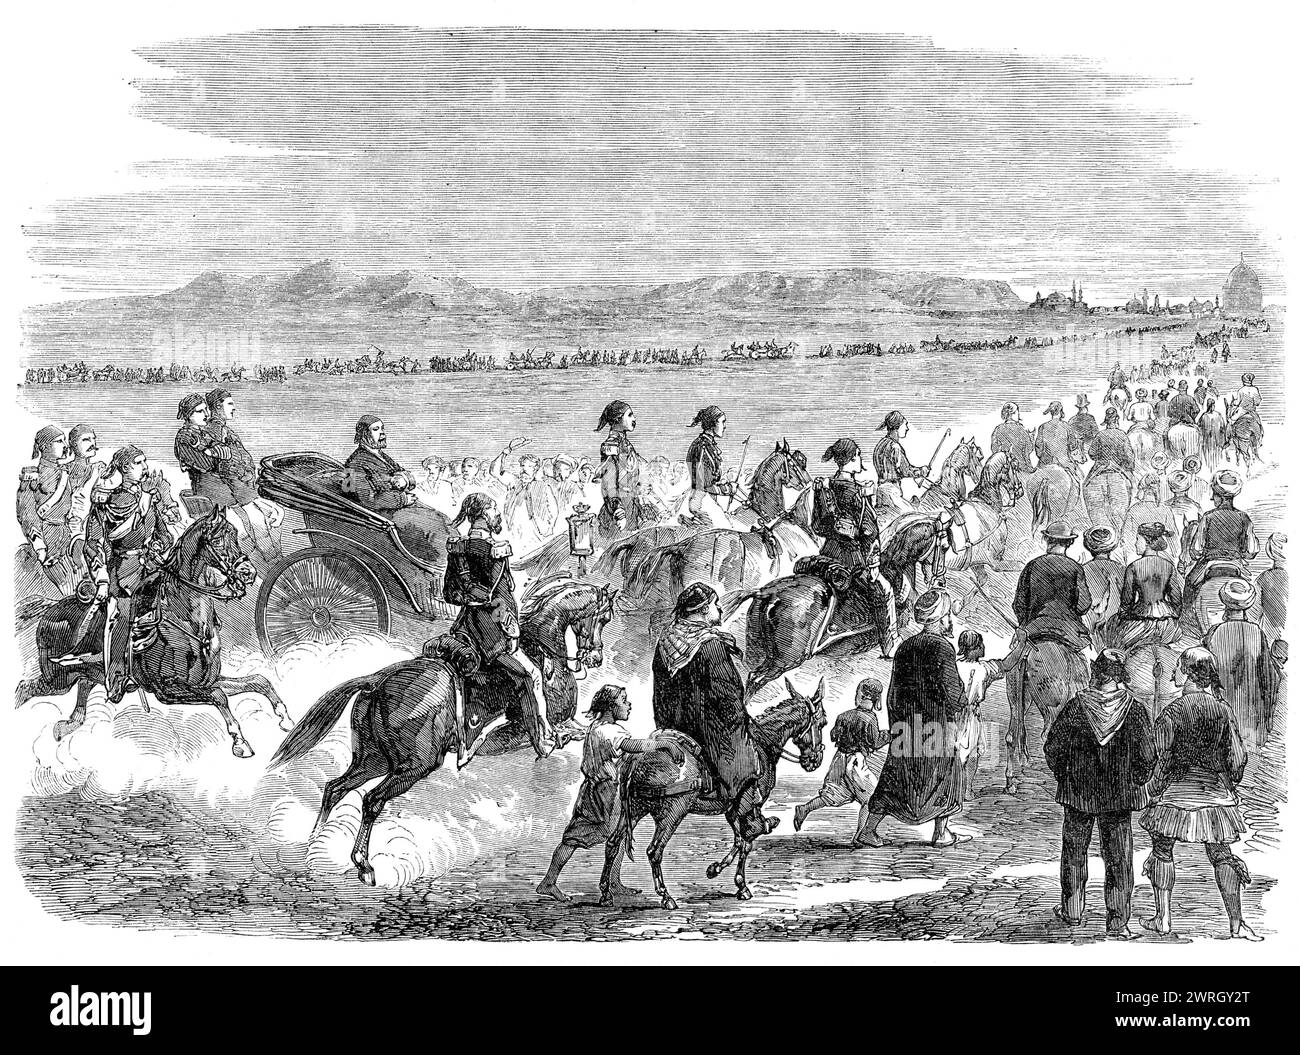 Returning from the races at Cairo, 1864. Engraving from a sketch by Mr. Frederick George, '...of a truly English sport held under most un-English conditions...This scene...differs essentially, in the matters of locality and costume, from a return from Epsom or Ascot. The hills in the distance are known as the Mokatem. At the end of the range may be distinguished the citadel, with its grand mosque, the most striking feature in the panorama of Cairo. To this point the multitude, broken into long streams, are making their way. Conspicuous amongst all in this motley assemblage is the glittering ca Stock Photo